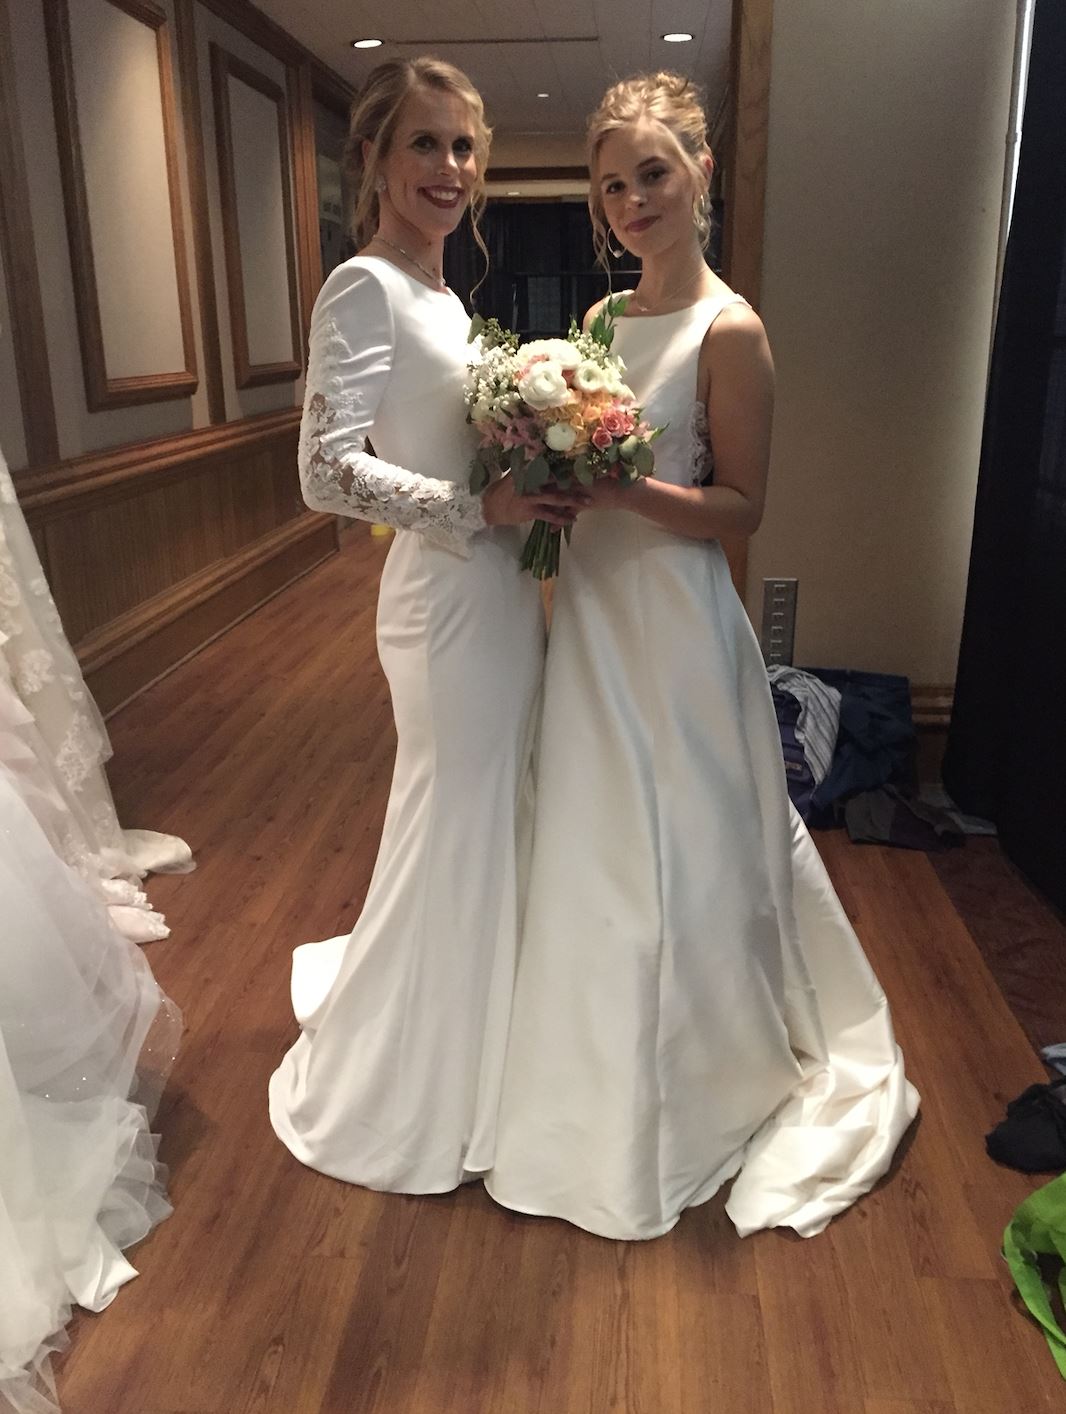 Photo of the real brides holding a bouquet